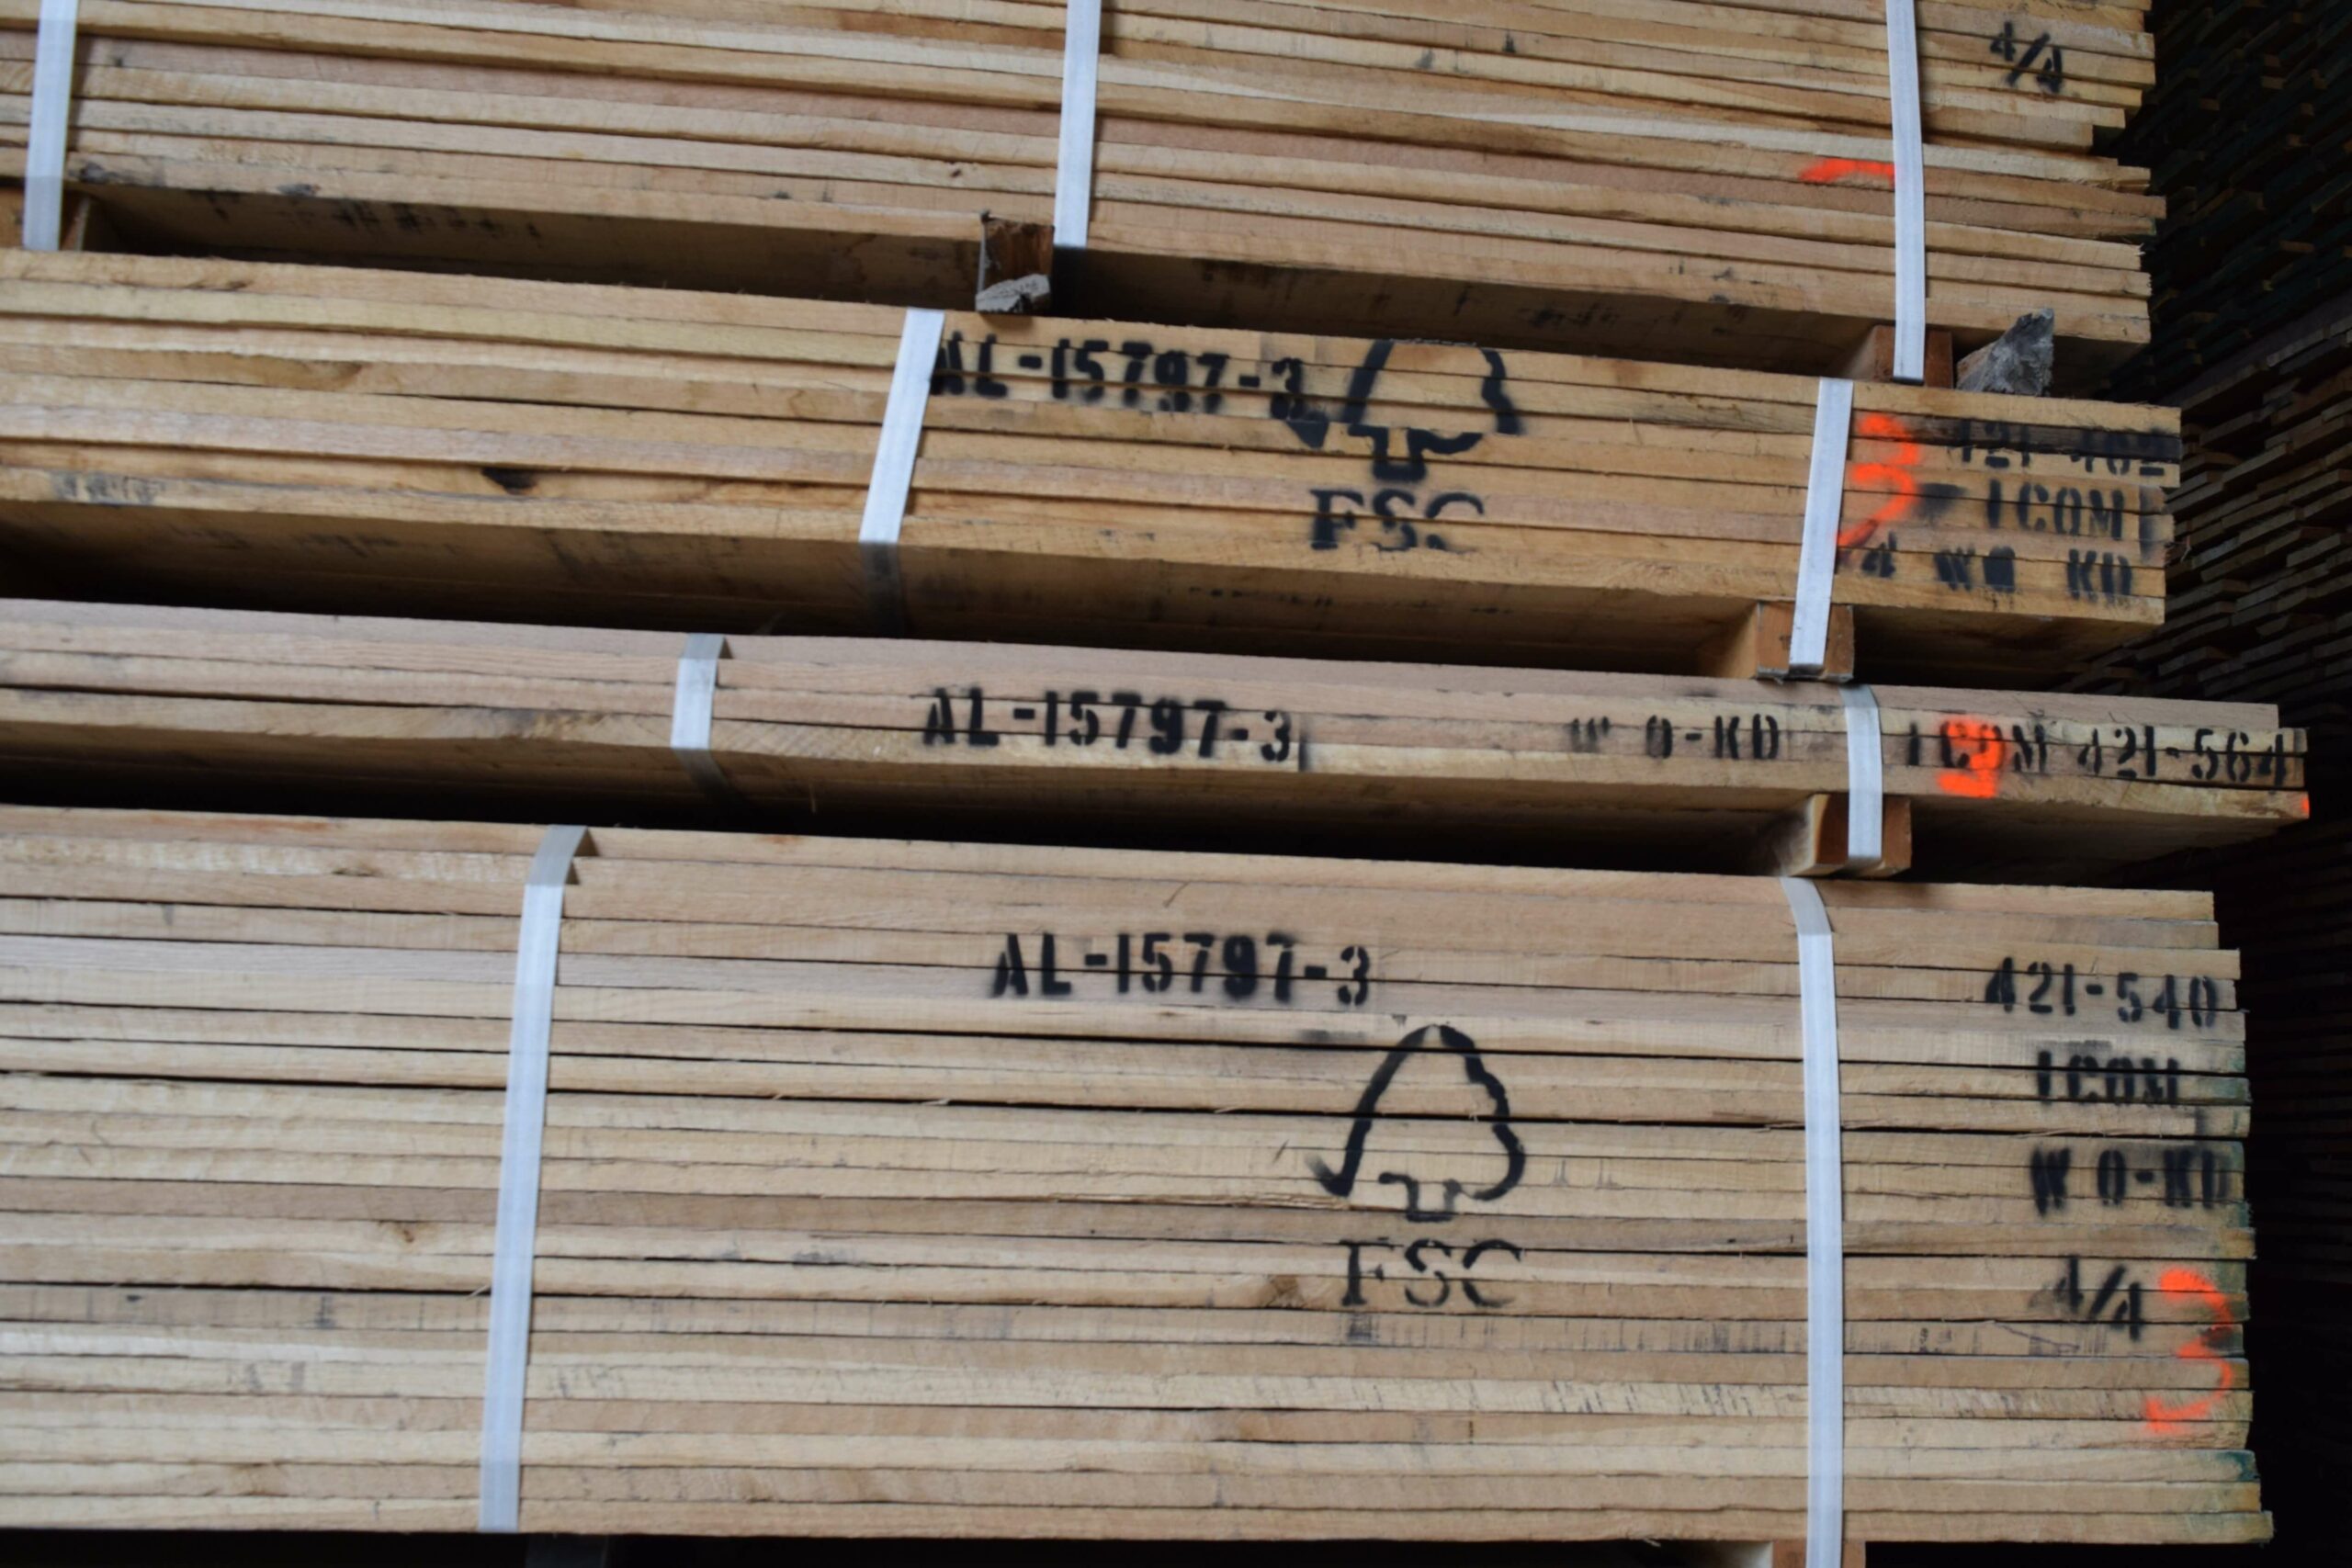 Stacks of lumber with the FSC Certified logo on them